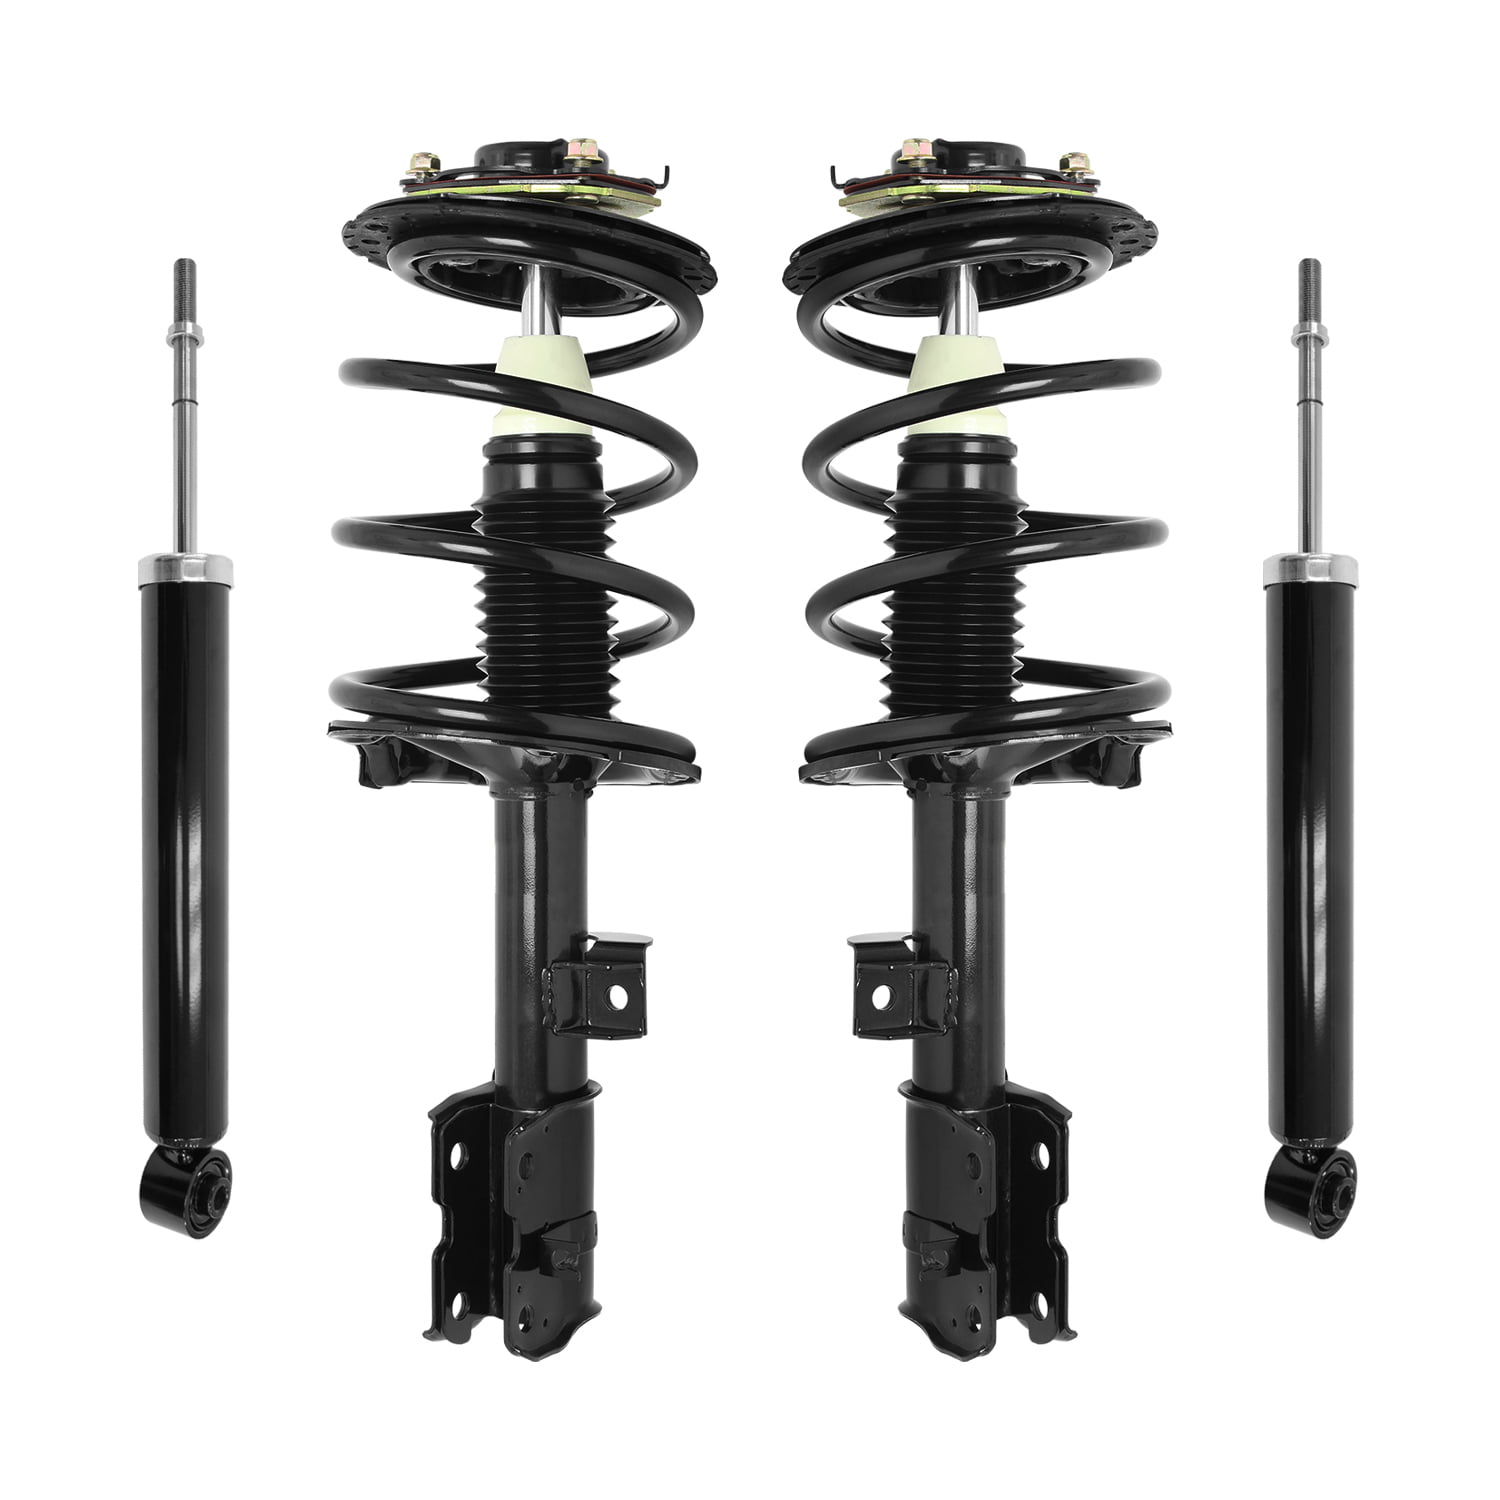 Focus Auto Parts Shock Absorber Front Rear Set Of 4 For Dodge Ram 1500 2002-2005